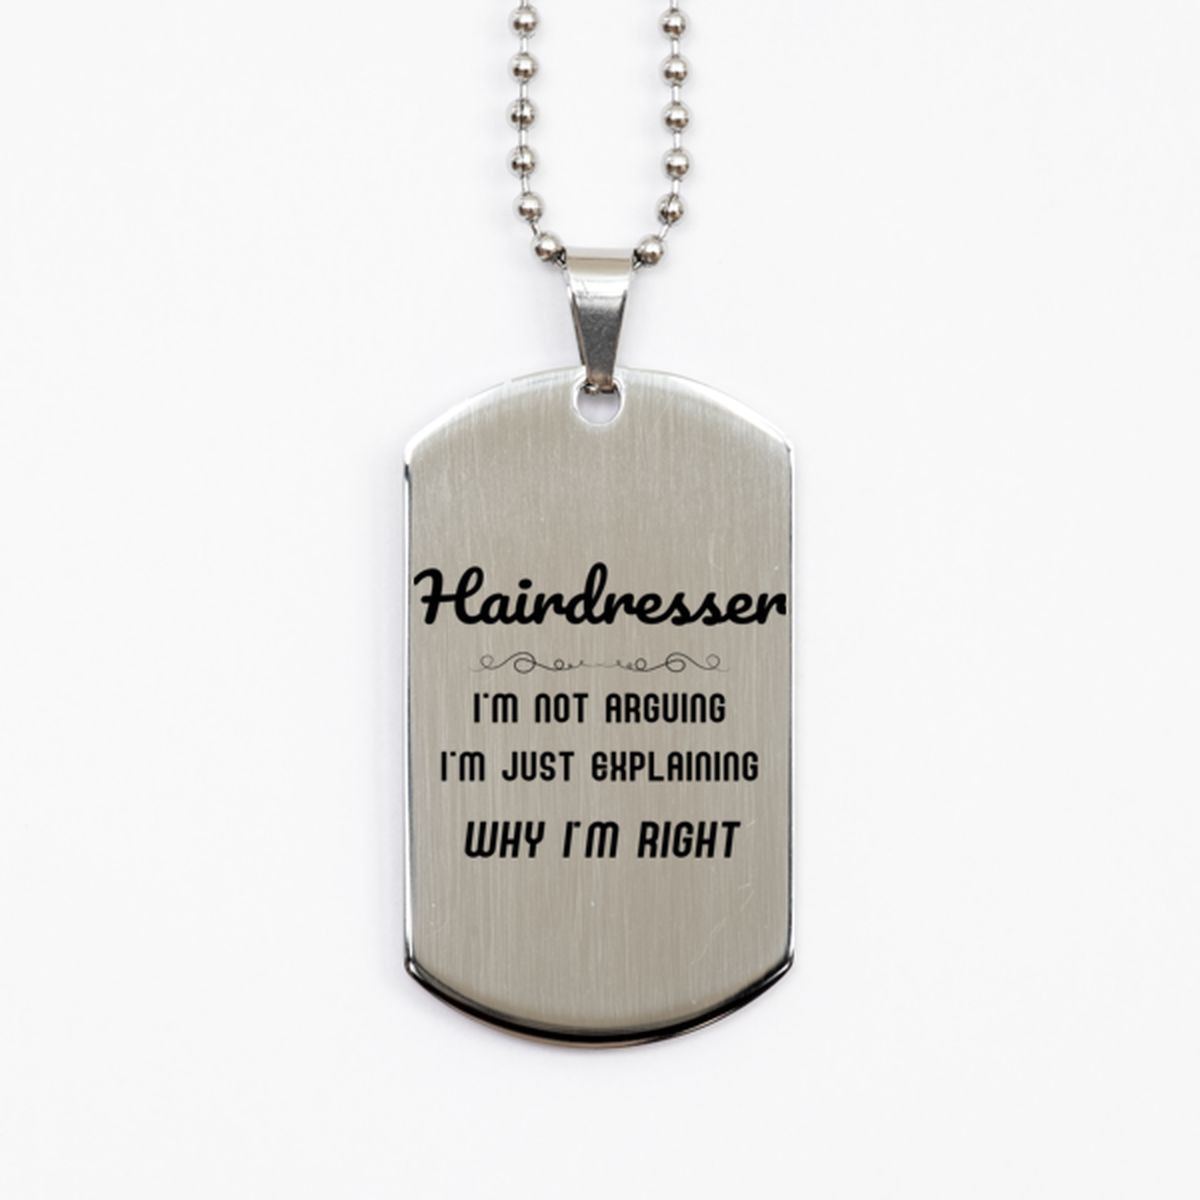 Hairdresser I'm not Arguing. I'm Just Explaining Why I'm RIGHT Silver Dog Tag, Funny Saying Quote Hairdresser Gifts For Hairdresser Graduation Birthday Christmas Gifts for Men Women Coworker